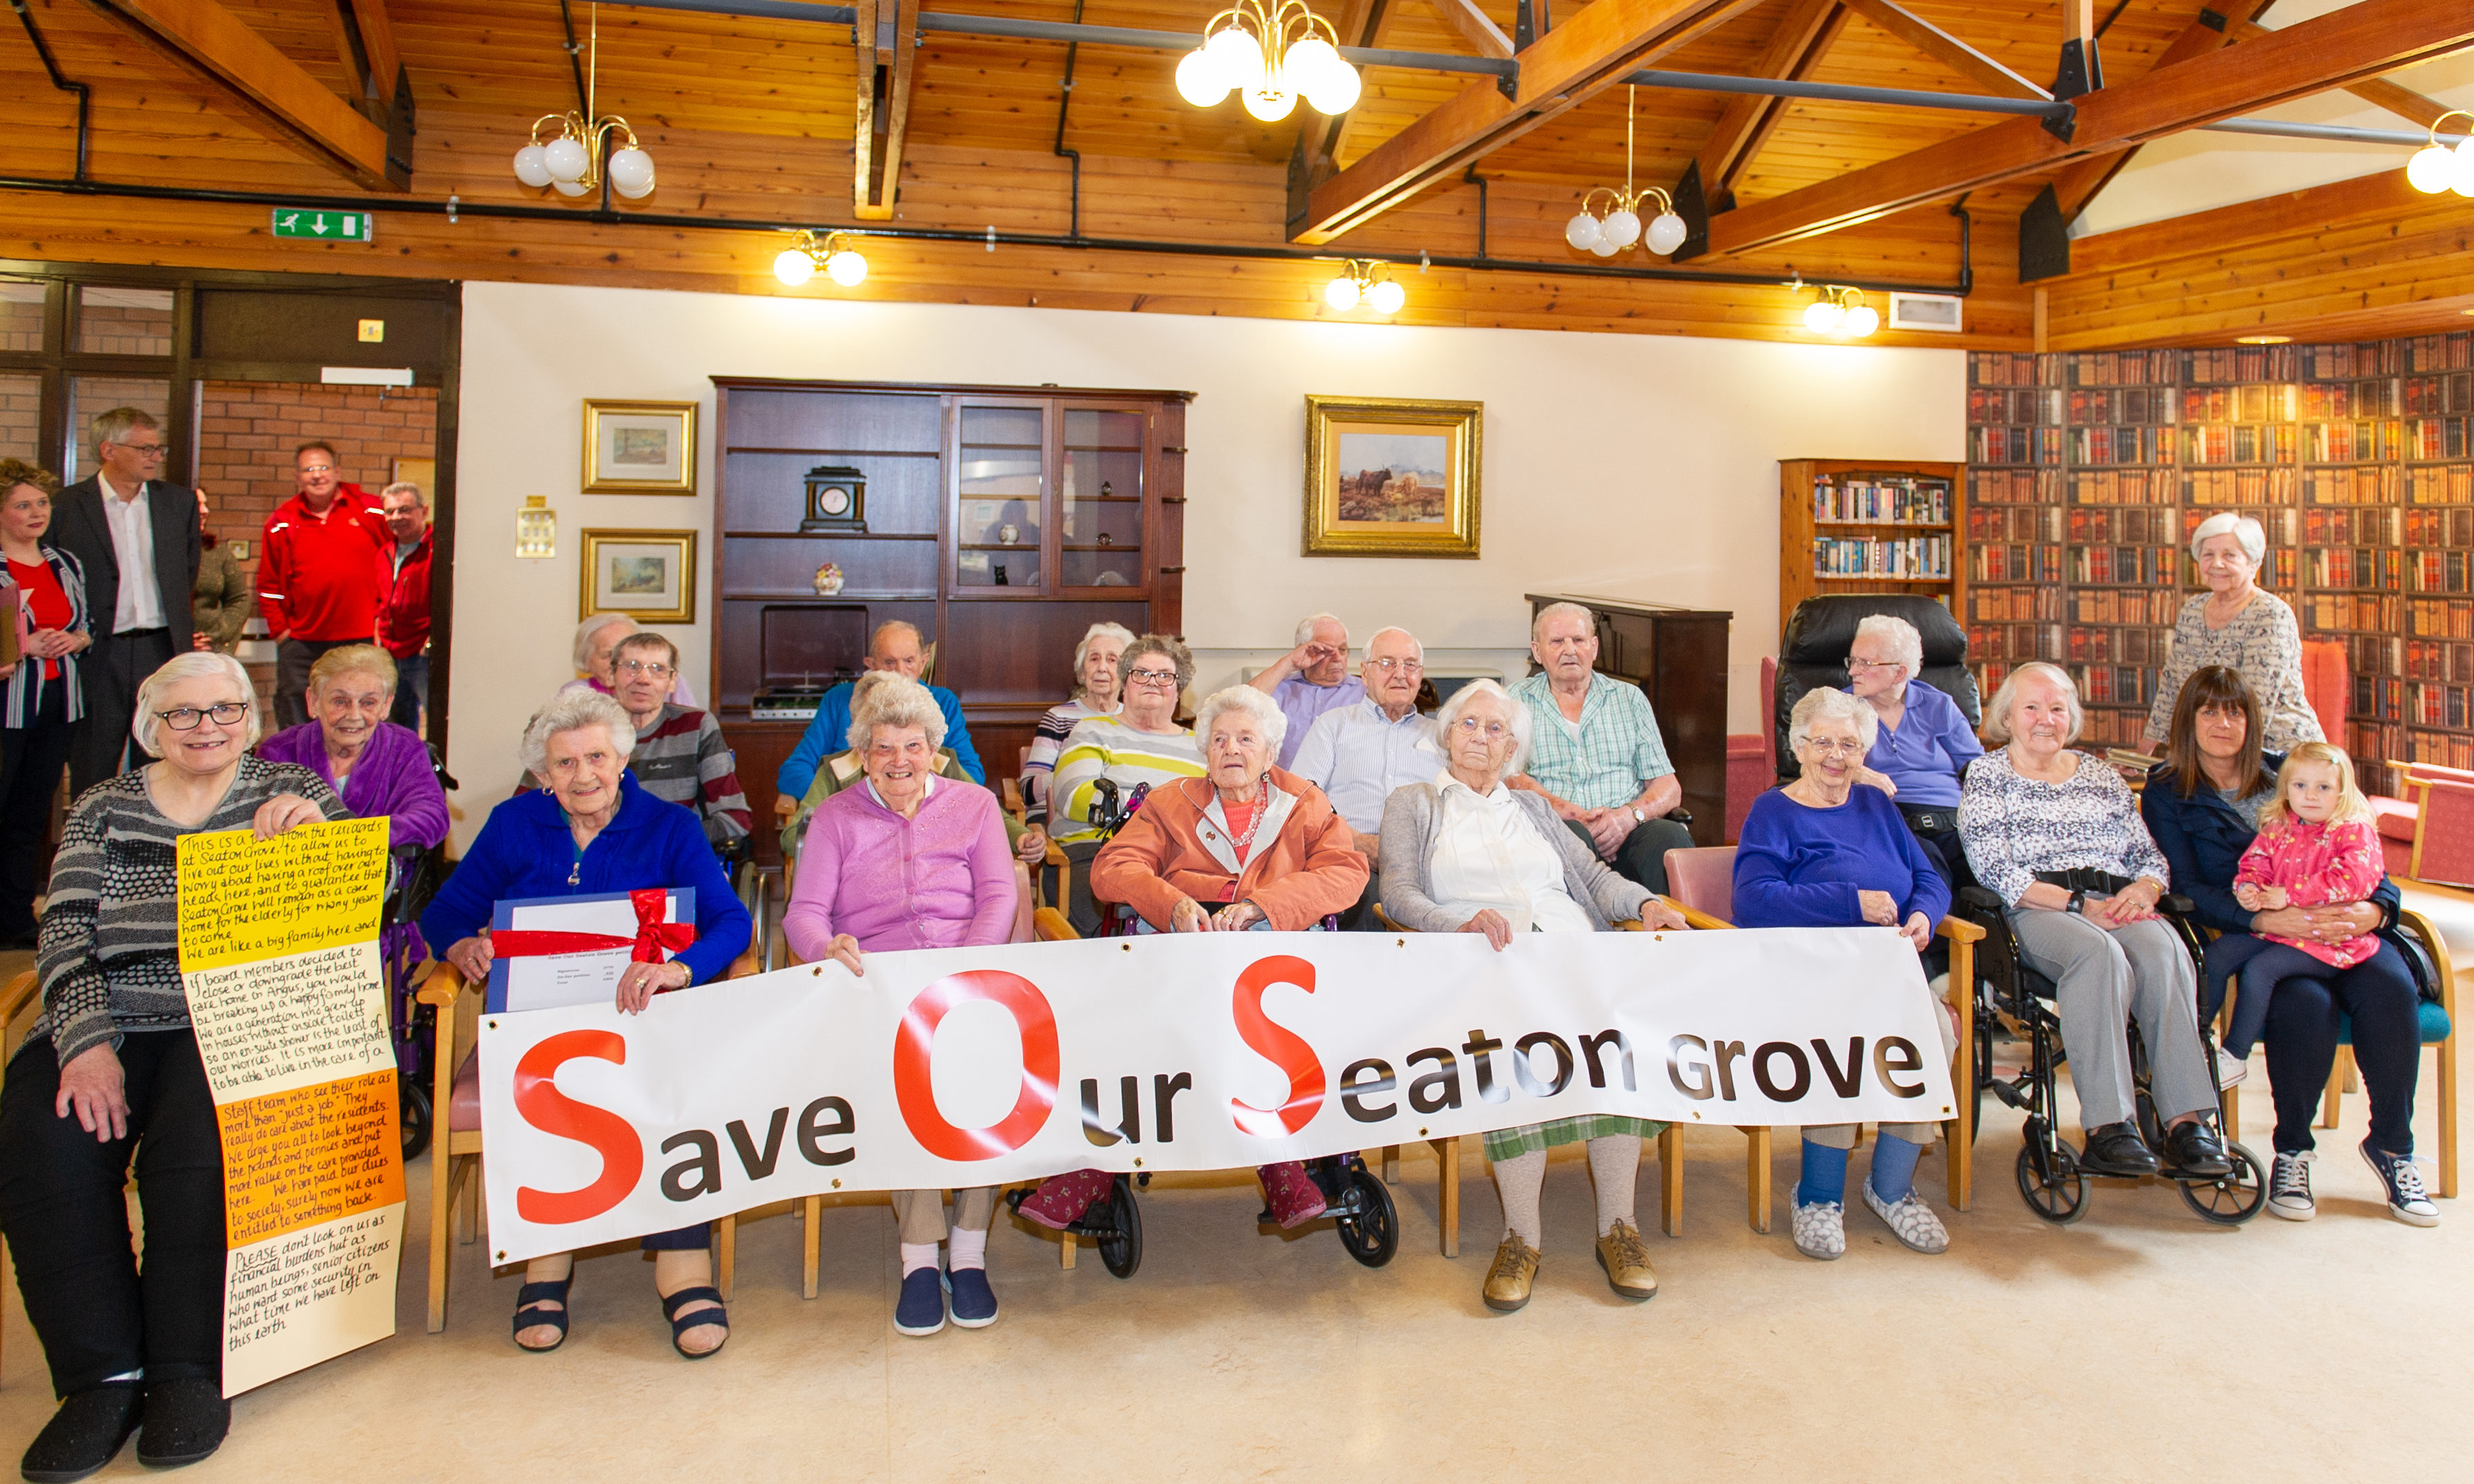 Some of the residents and supporters with the banner made to highlight the potential closure of the facility.